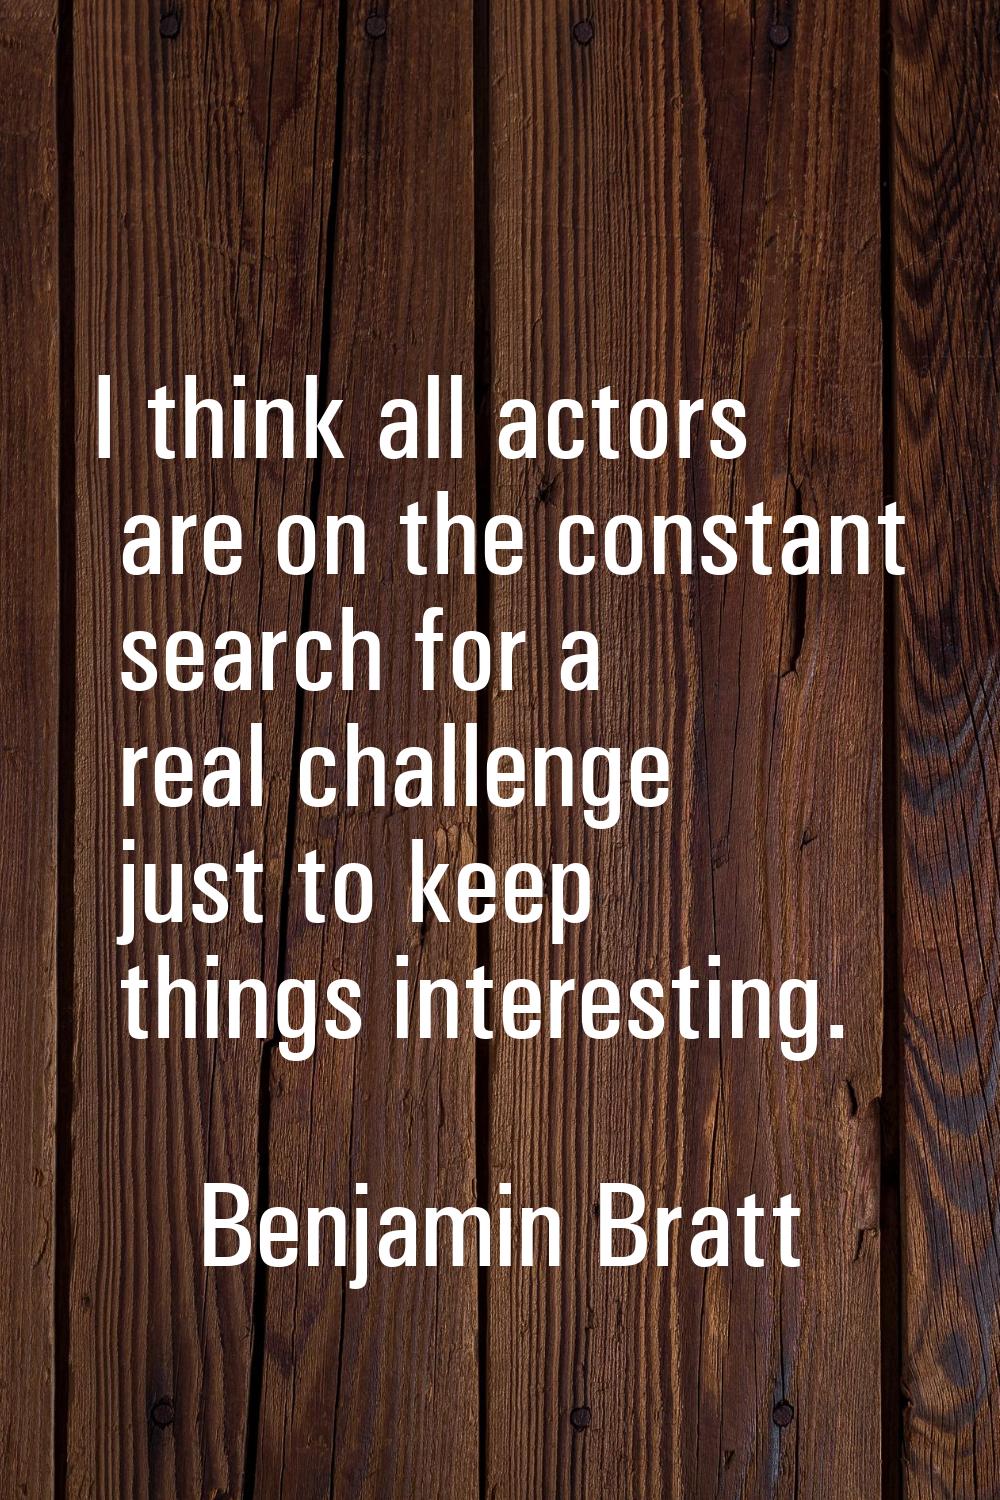 I think all actors are on the constant search for a real challenge just to keep things interesting.